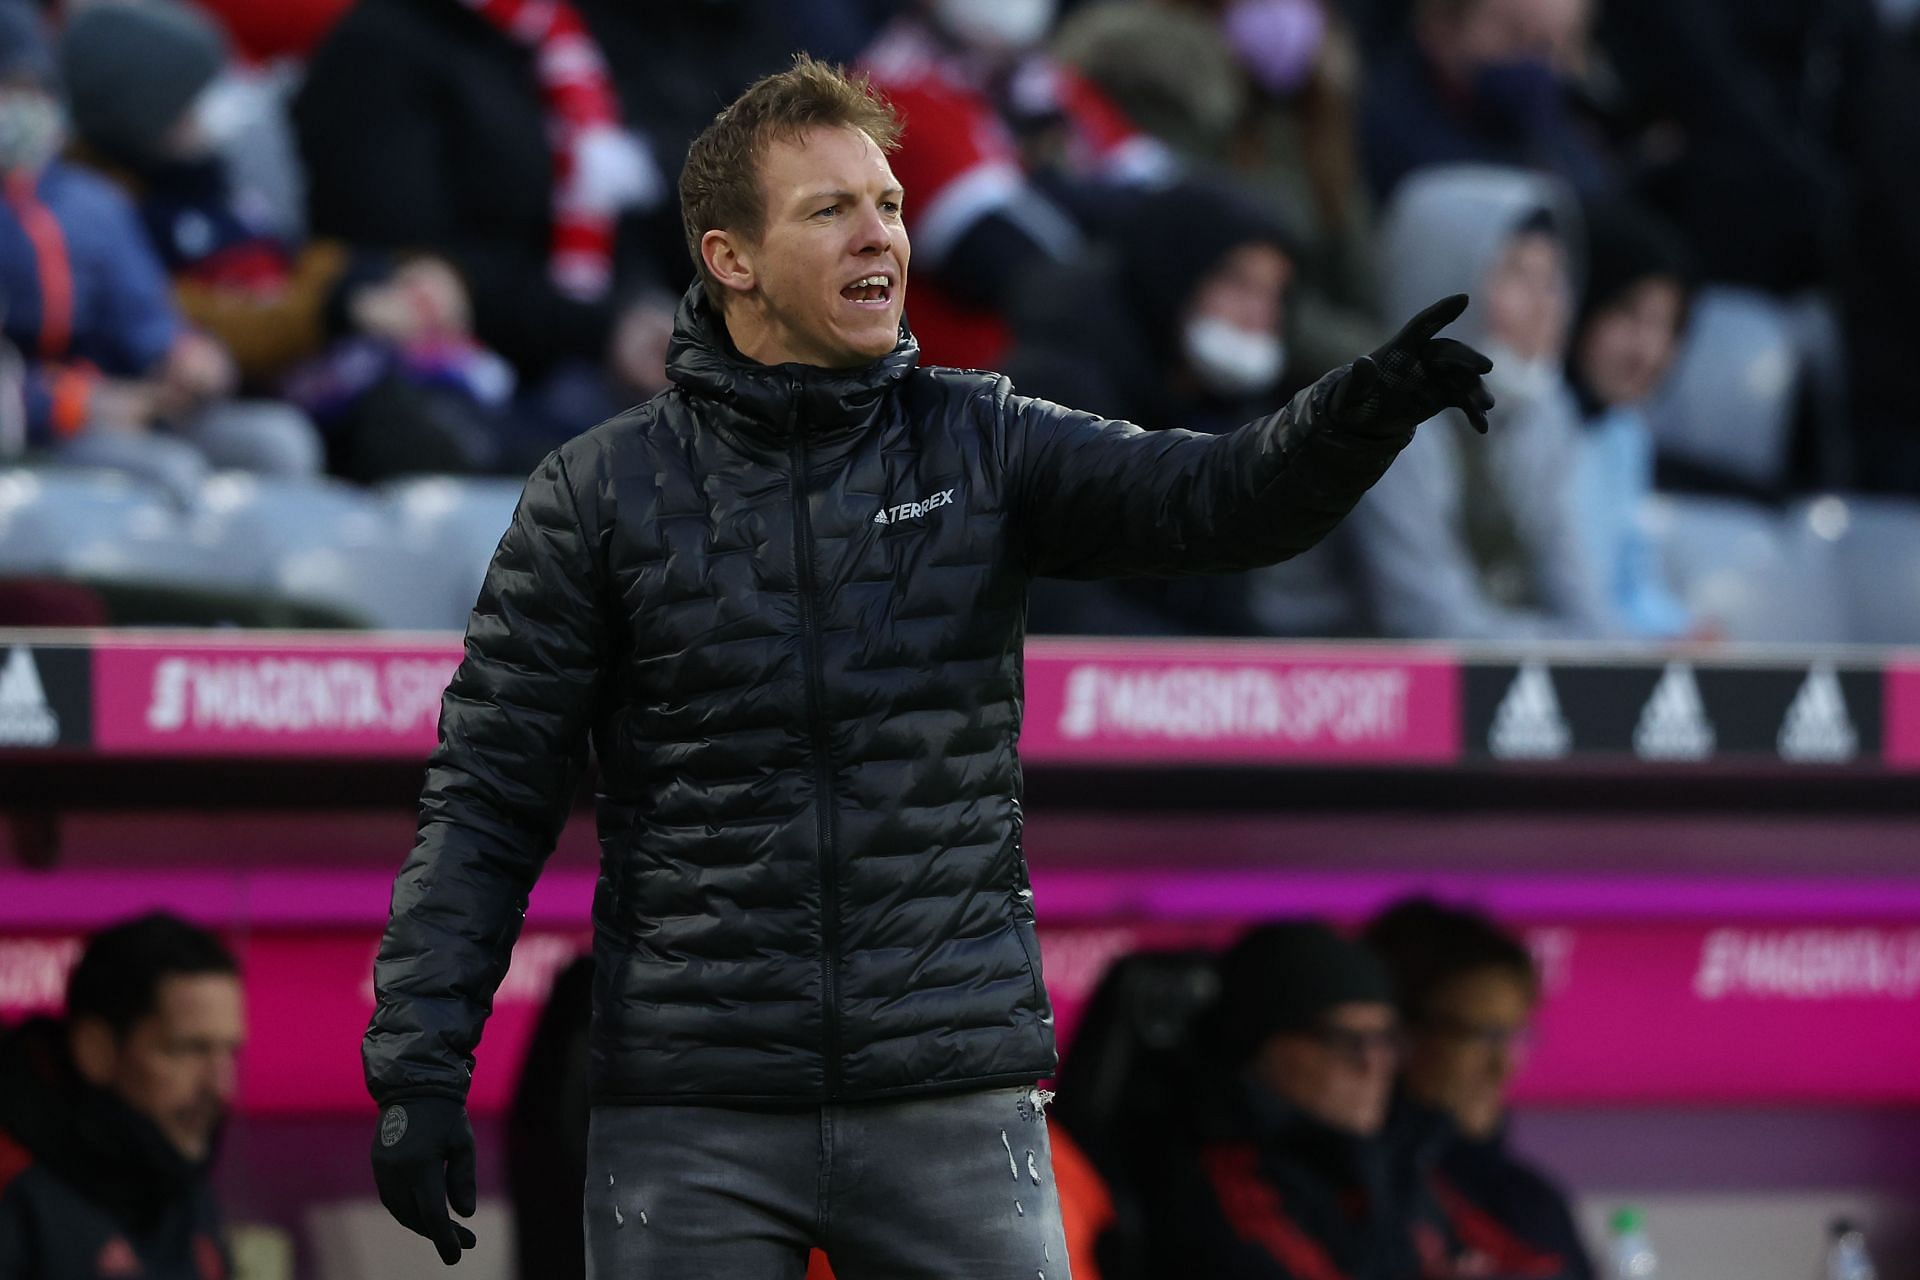 Nagelsmann claimed his first trophy as Bayern Munich manager in August last year.